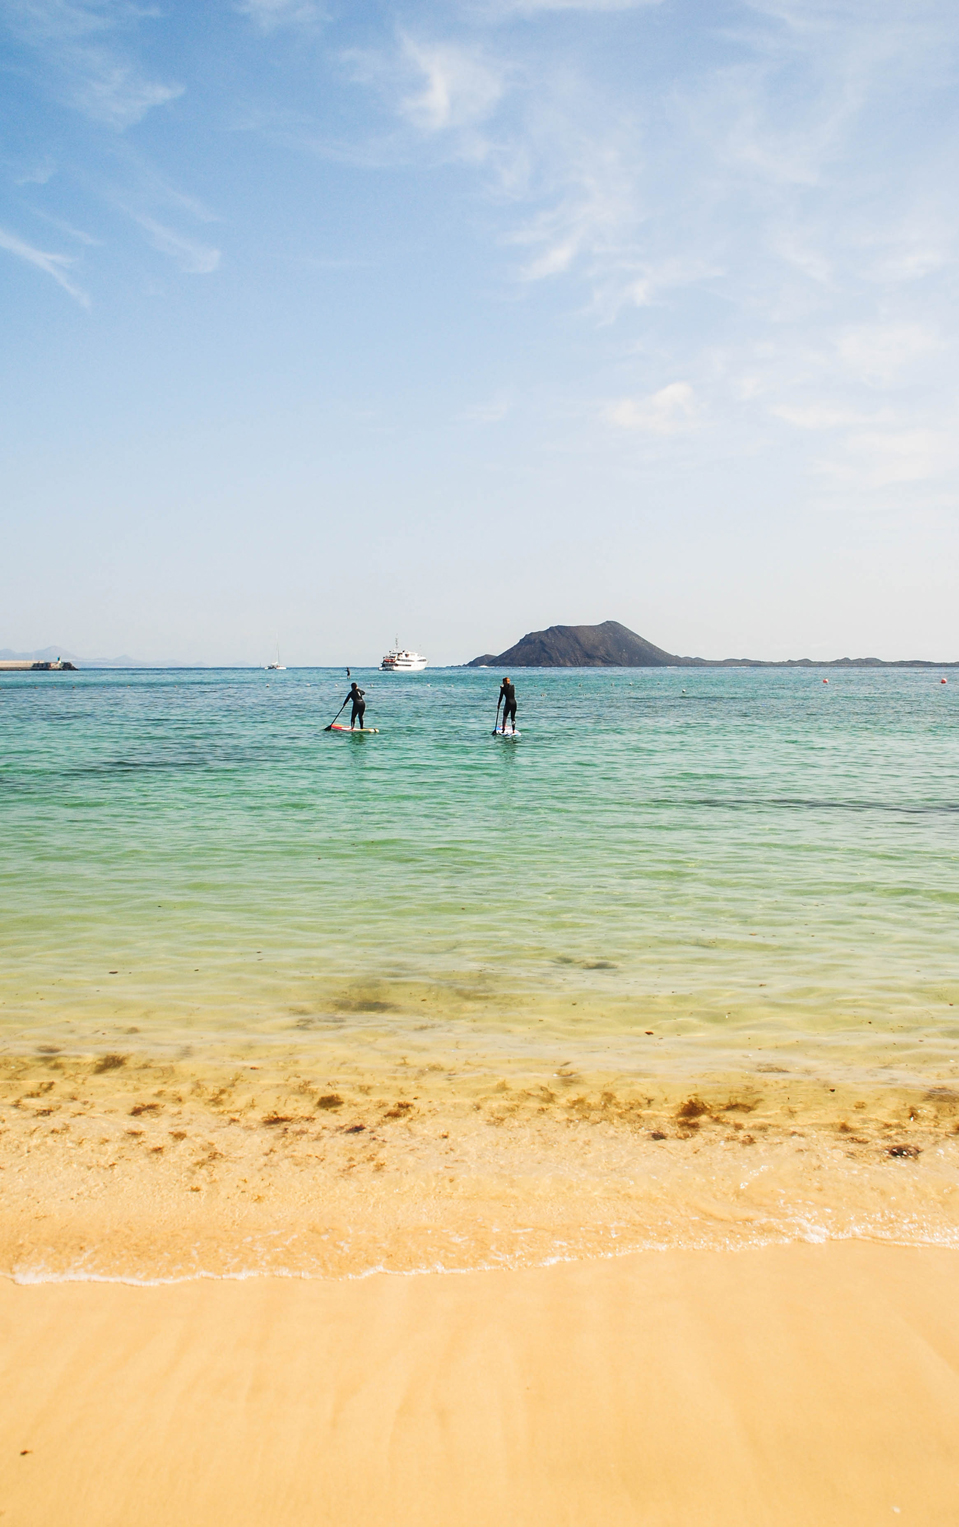 Fuerteventura stand-up paddle boarding